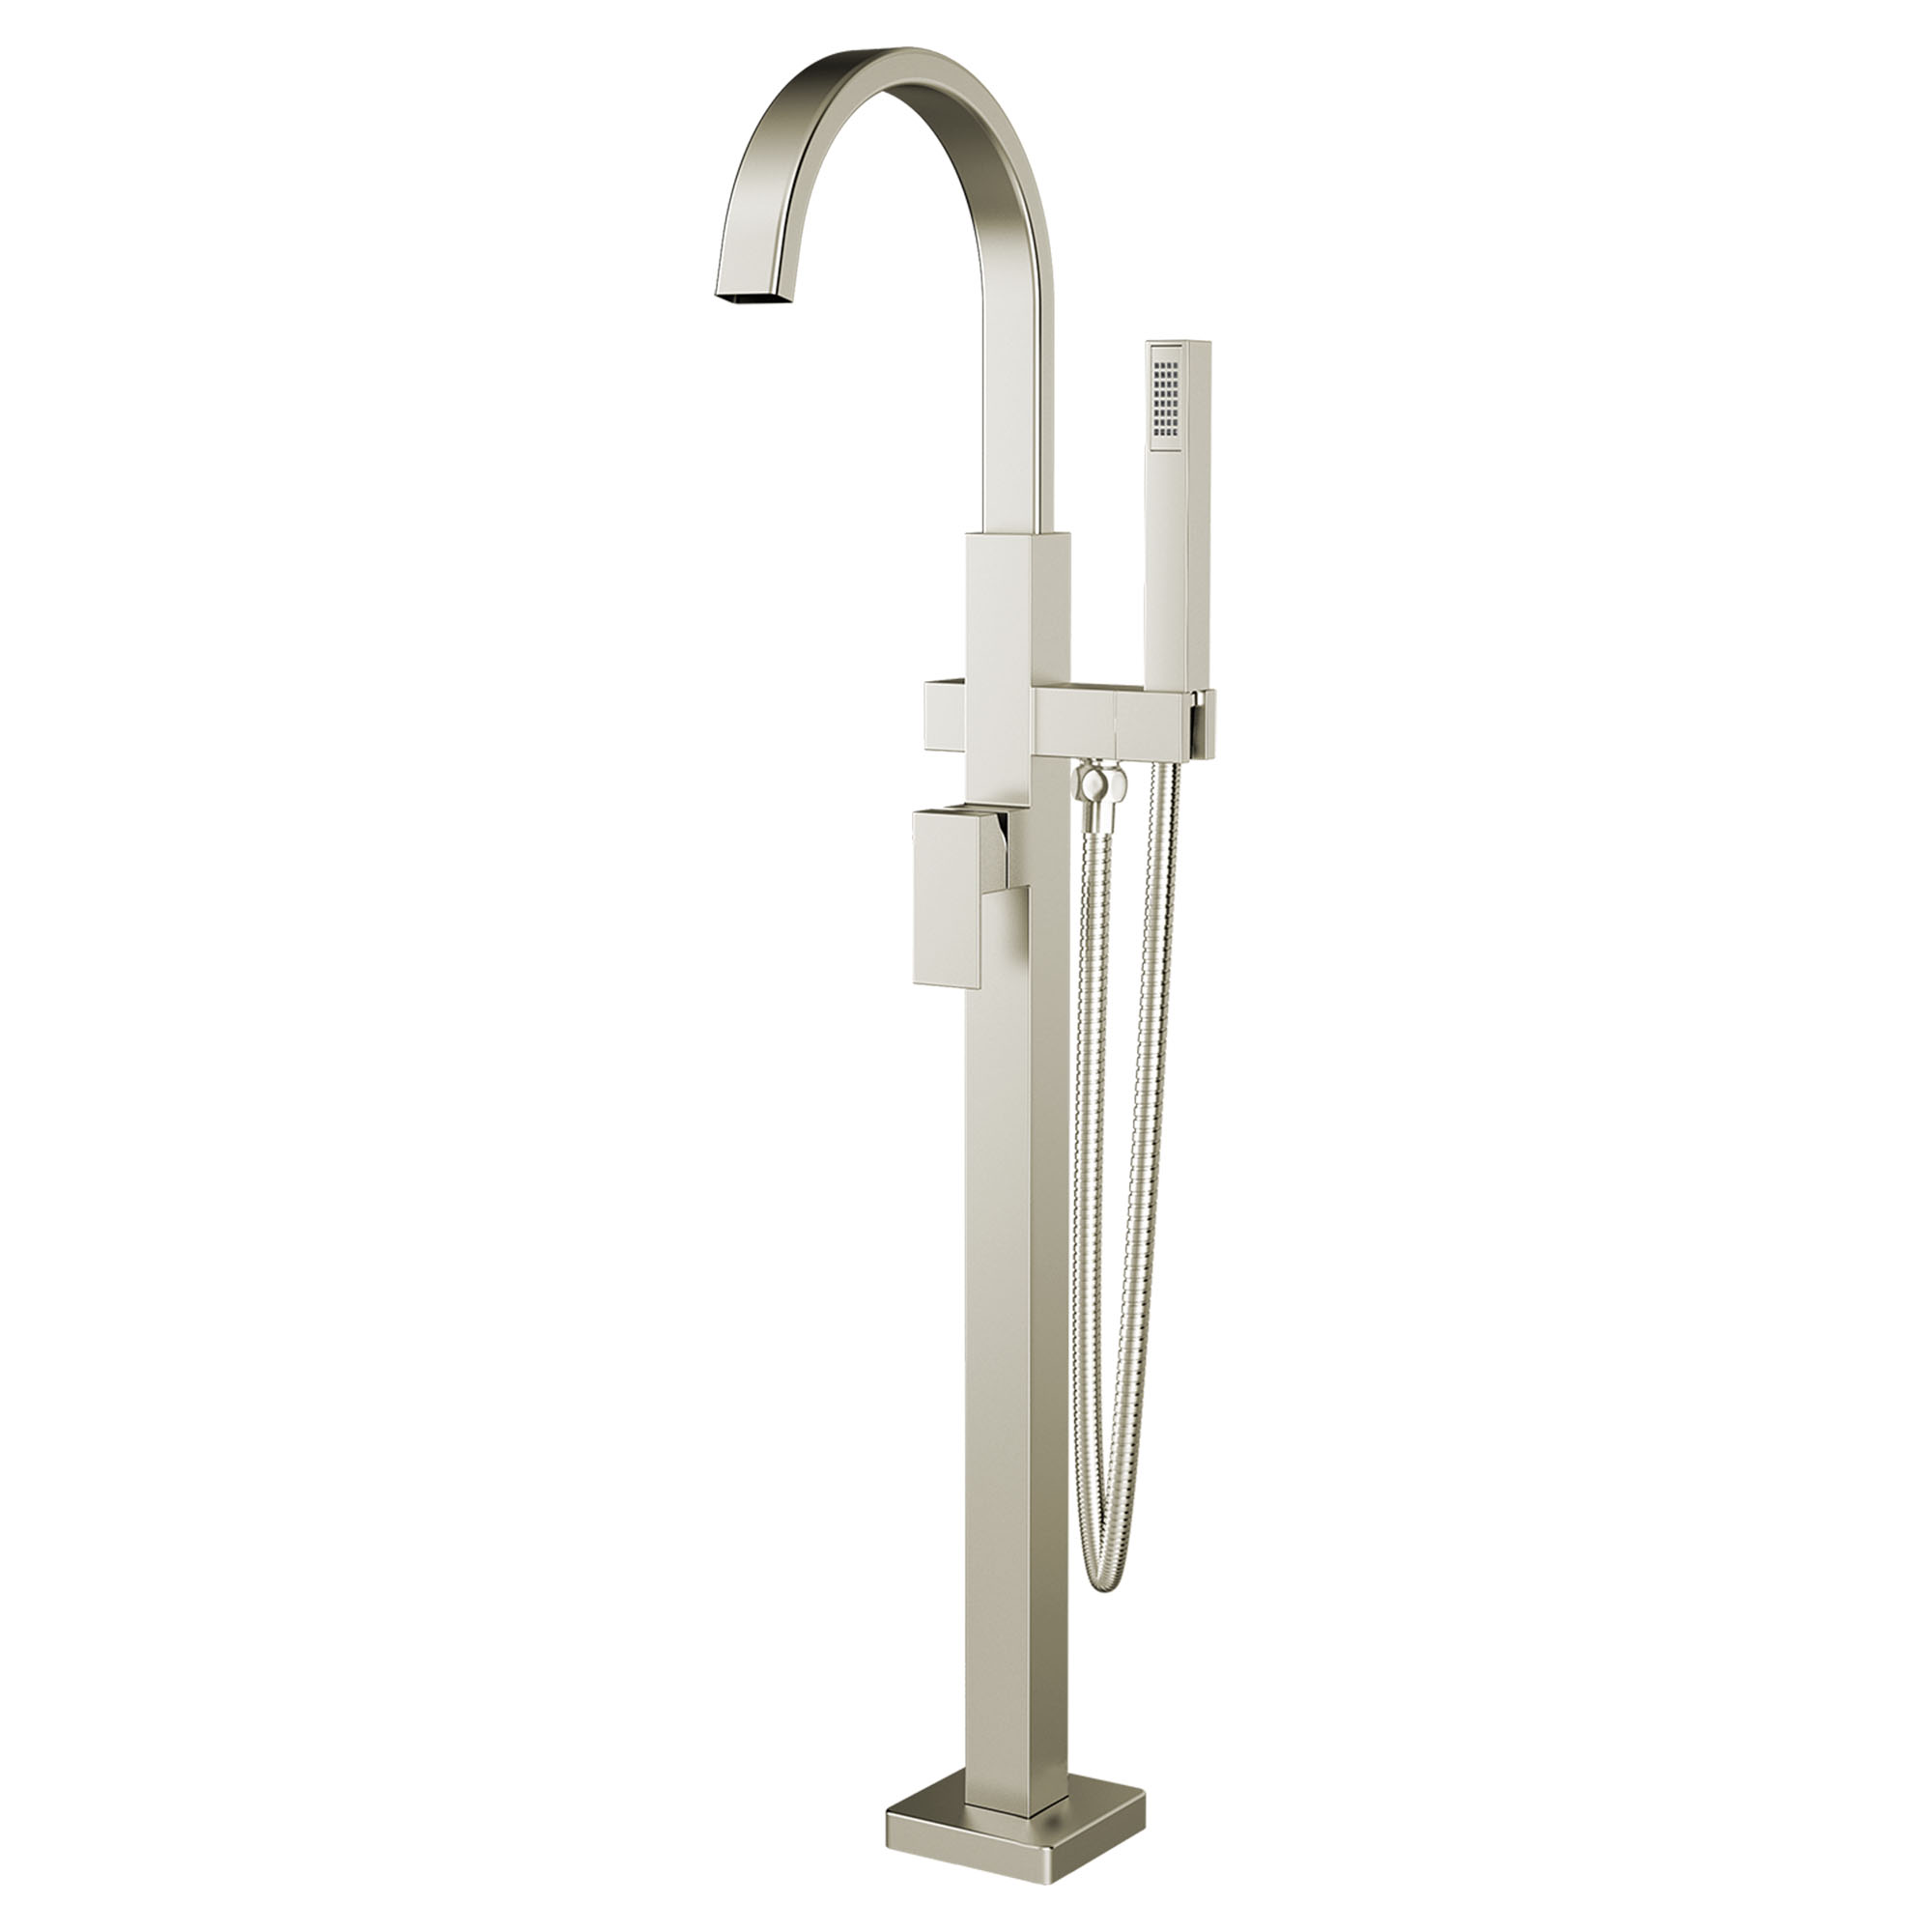 Times Square Contemporary Square Freestanding Tub Faucet with Personal Shower for Flash Rough-in Valve with Lever Handle